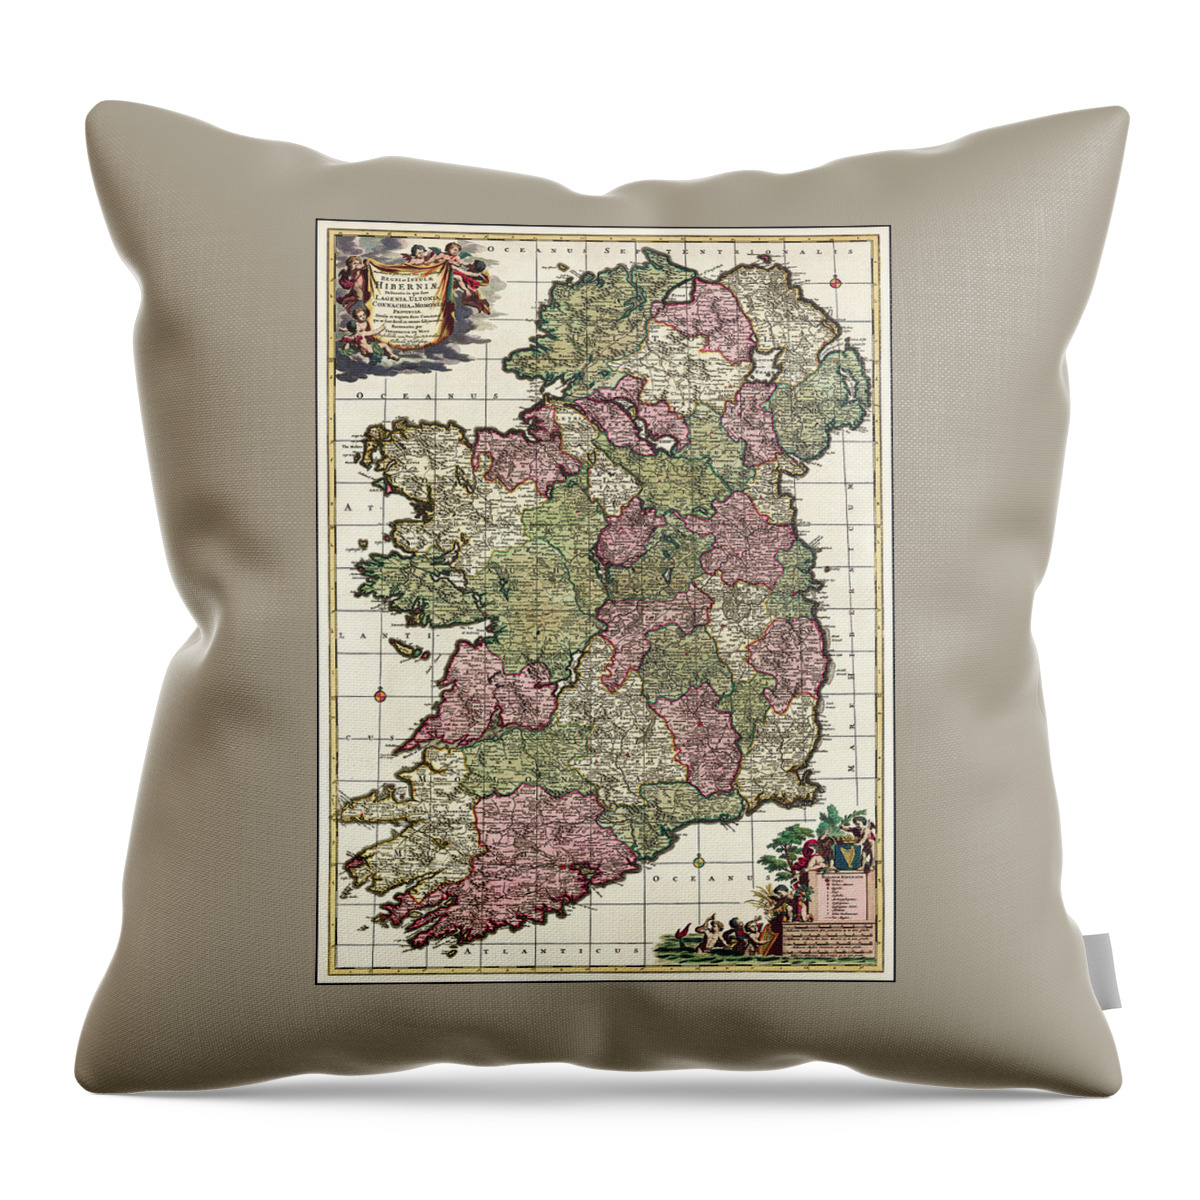 Ireland Throw Pillow featuring the photograph Ireland Vintage Historical Map 1700 by Carol Japp